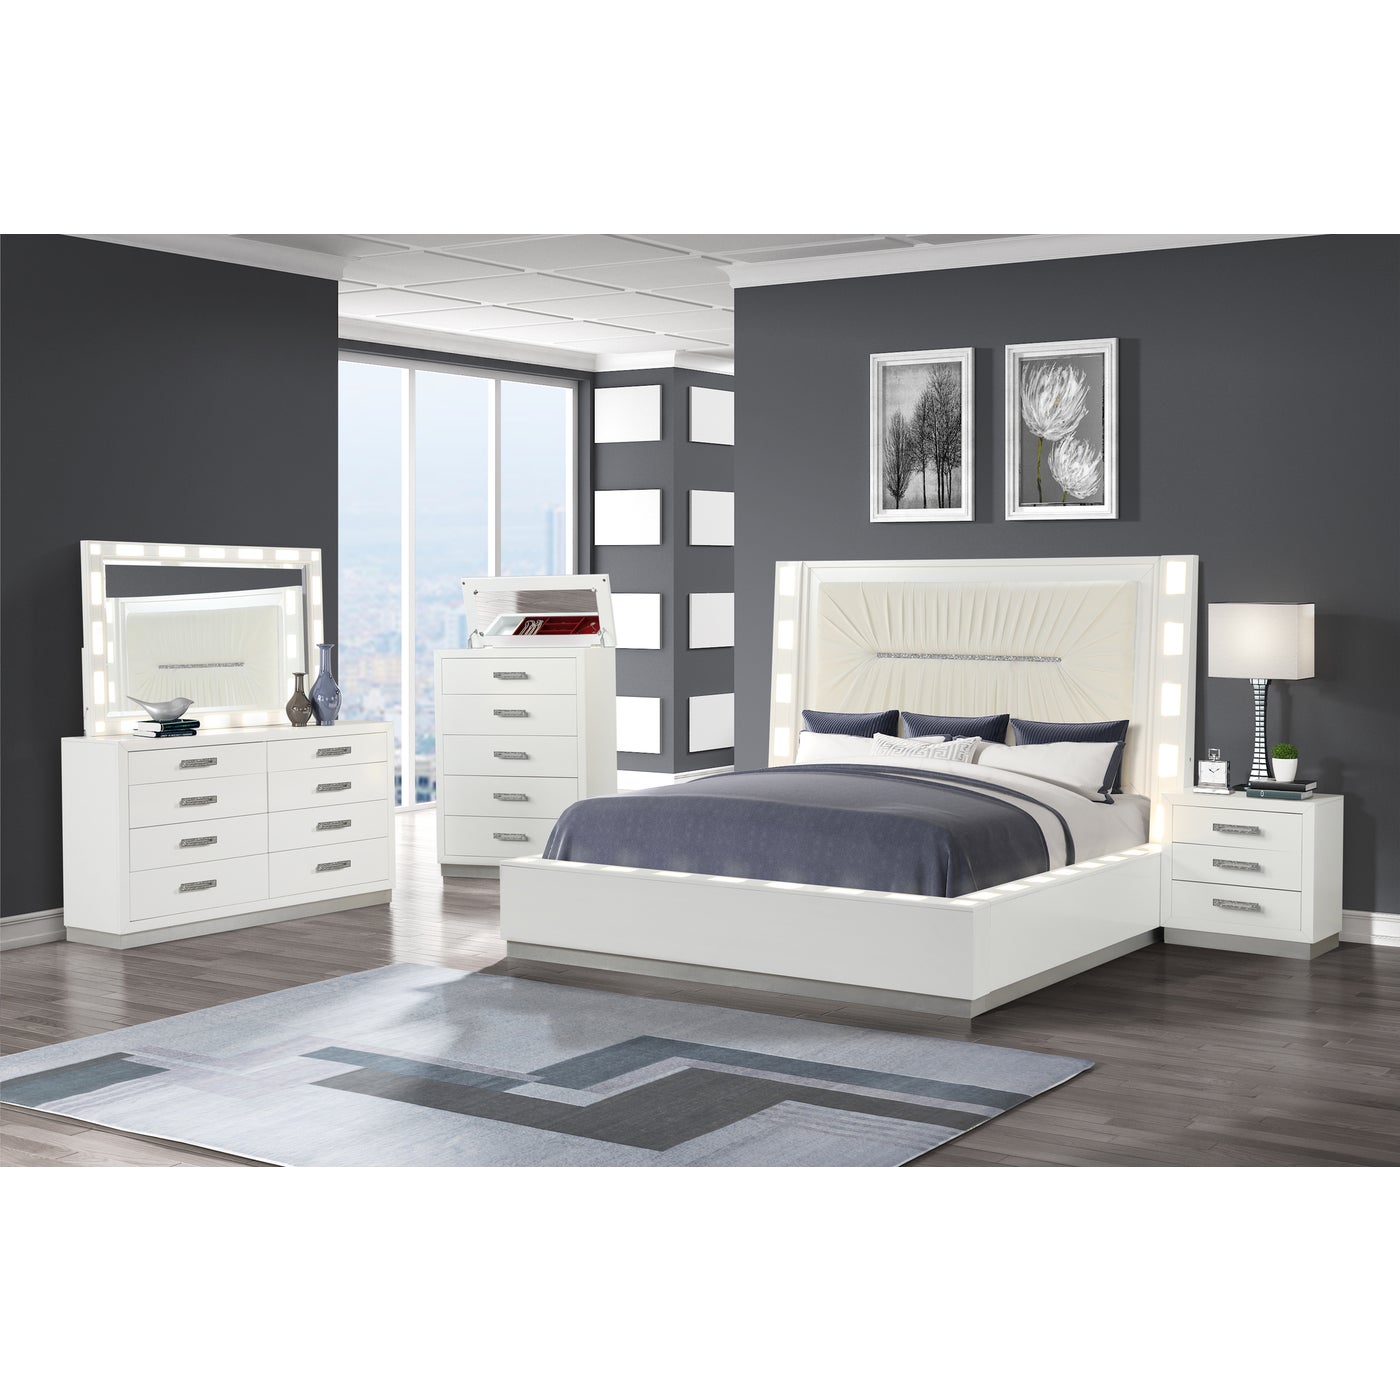 Coco Bedroom Collection 1321